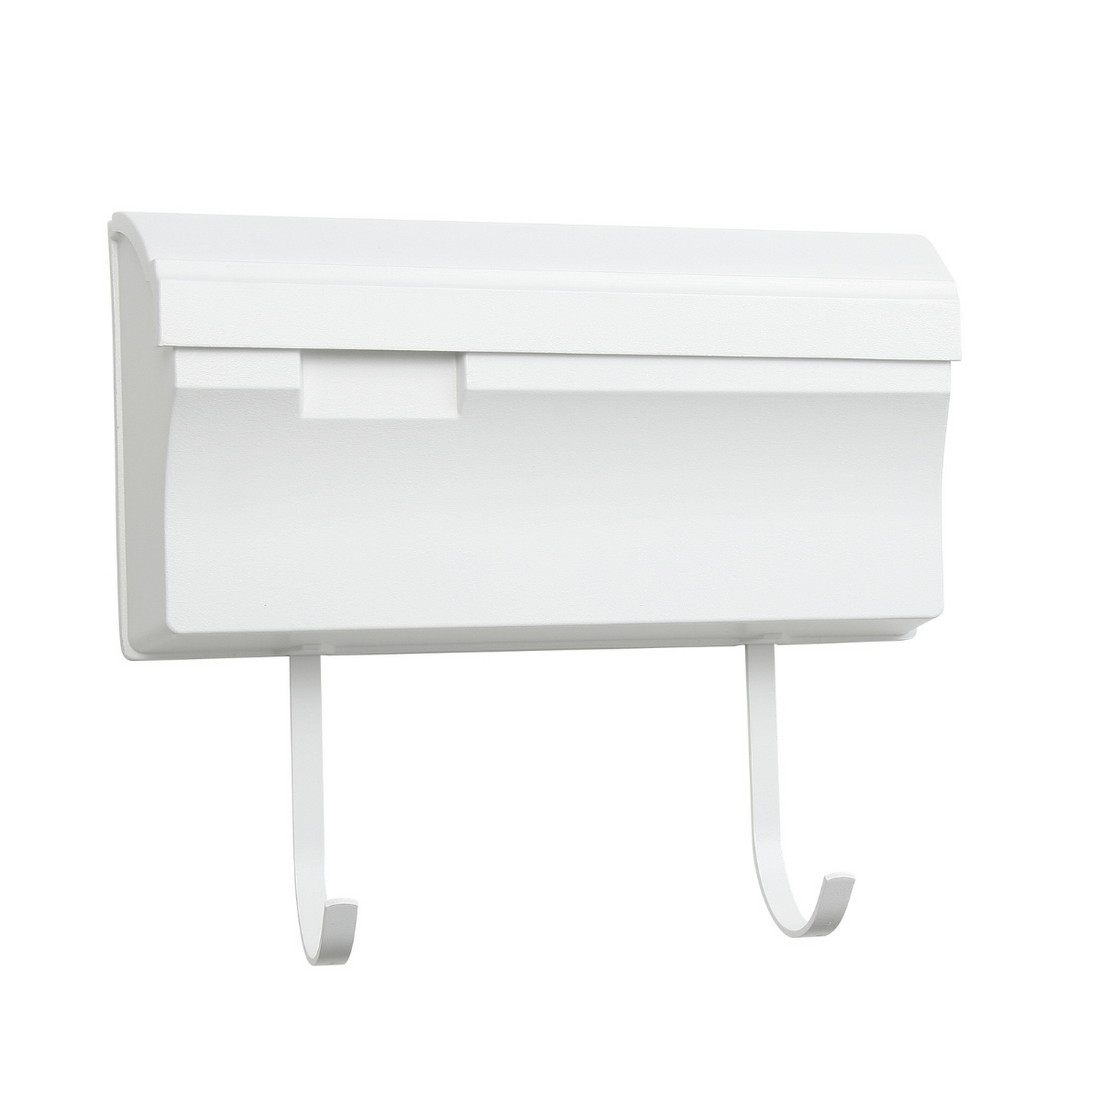 Vintage - Horizontal letterbox with hook - 71041